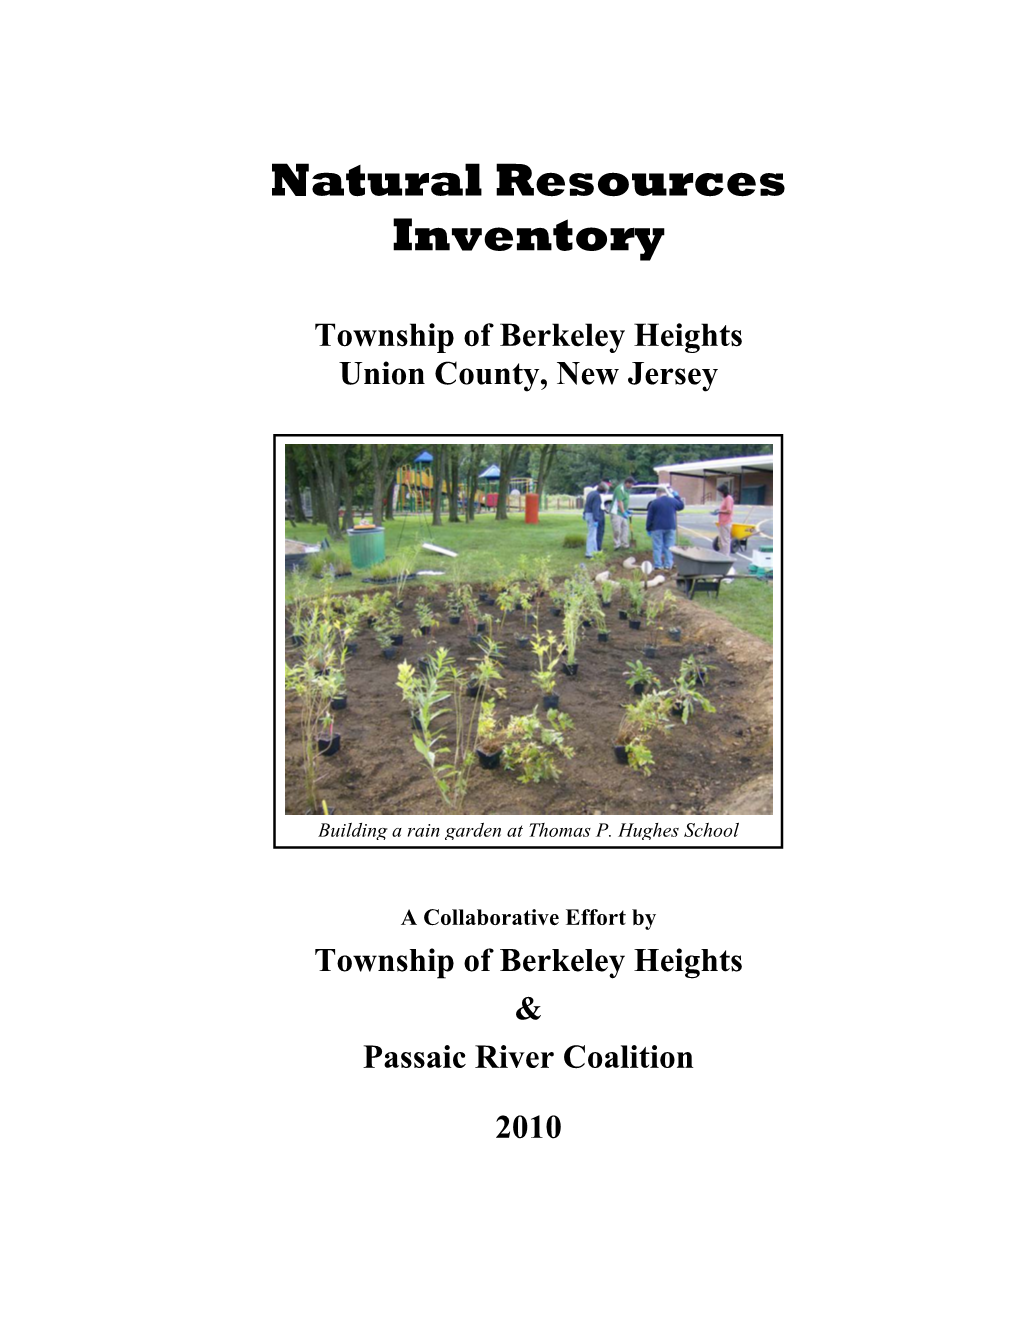 Natural Resources Inventory